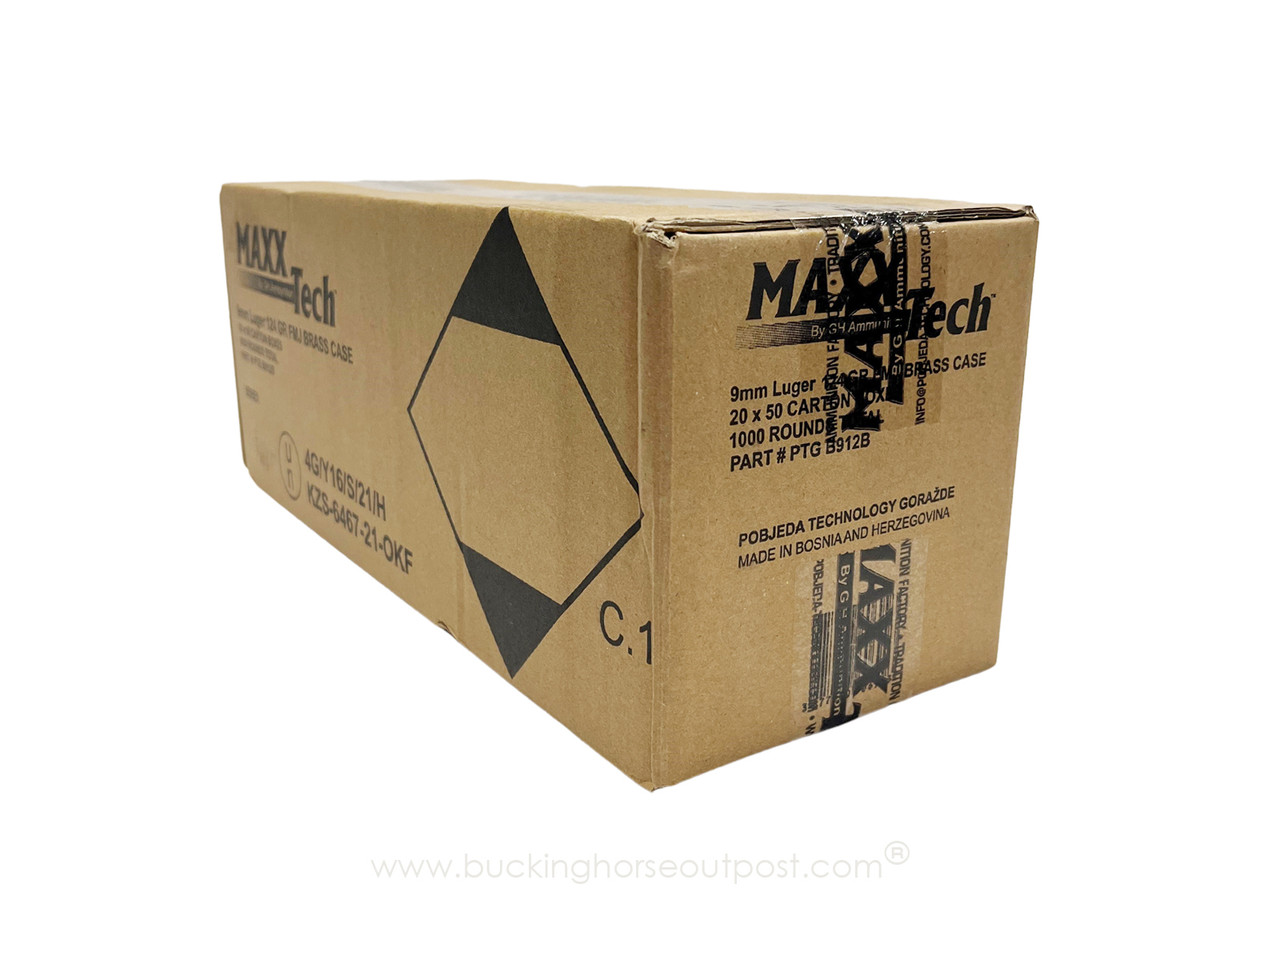 01 Cardboard Ammo Box for .380, 9mm, or .38 Super – Top Brass Reloading  Supplies